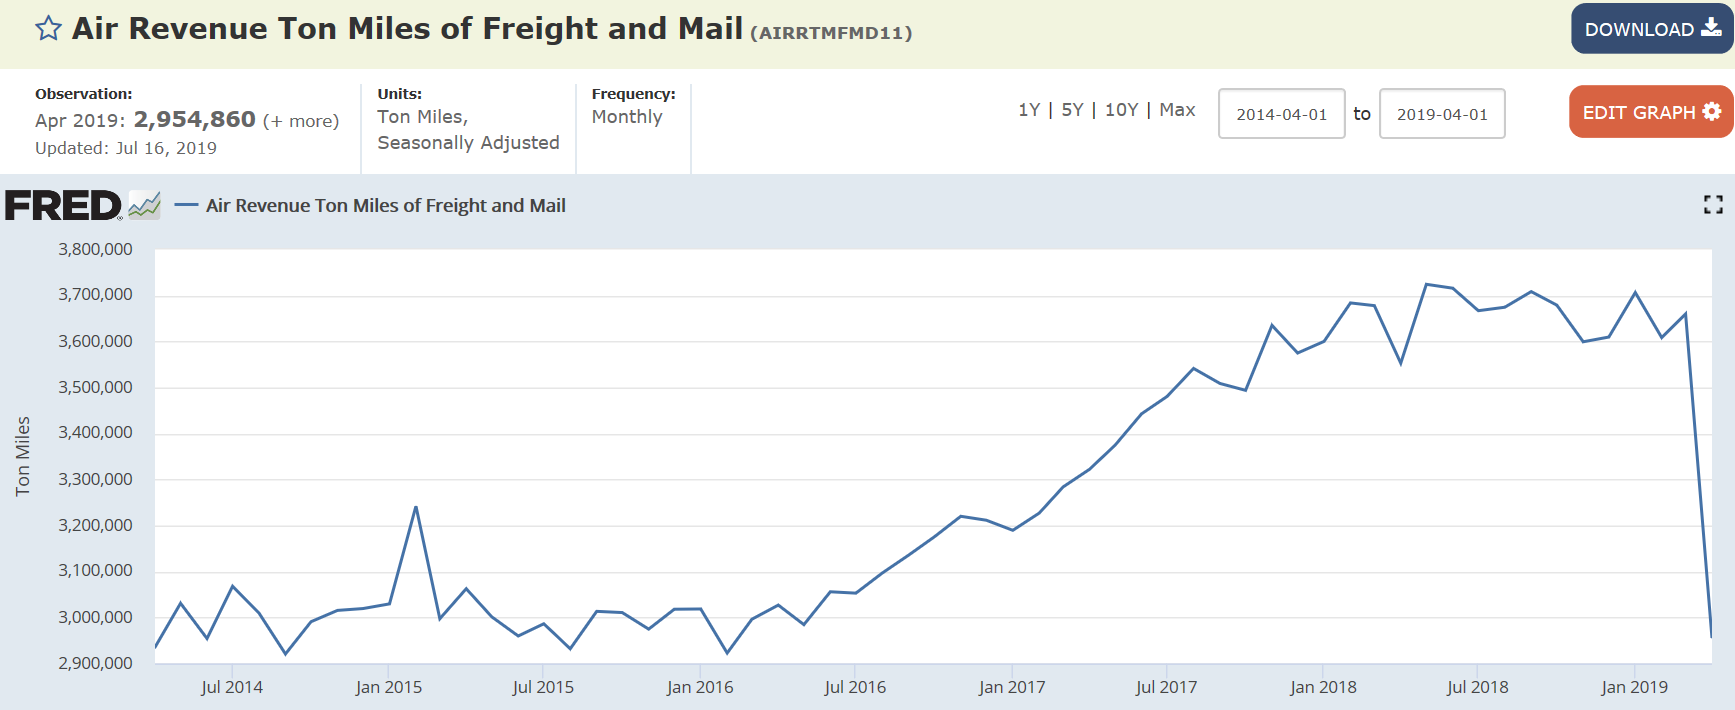 Air freight, Rails, Oil and Gas, Morgan Stanley index, Semi sales